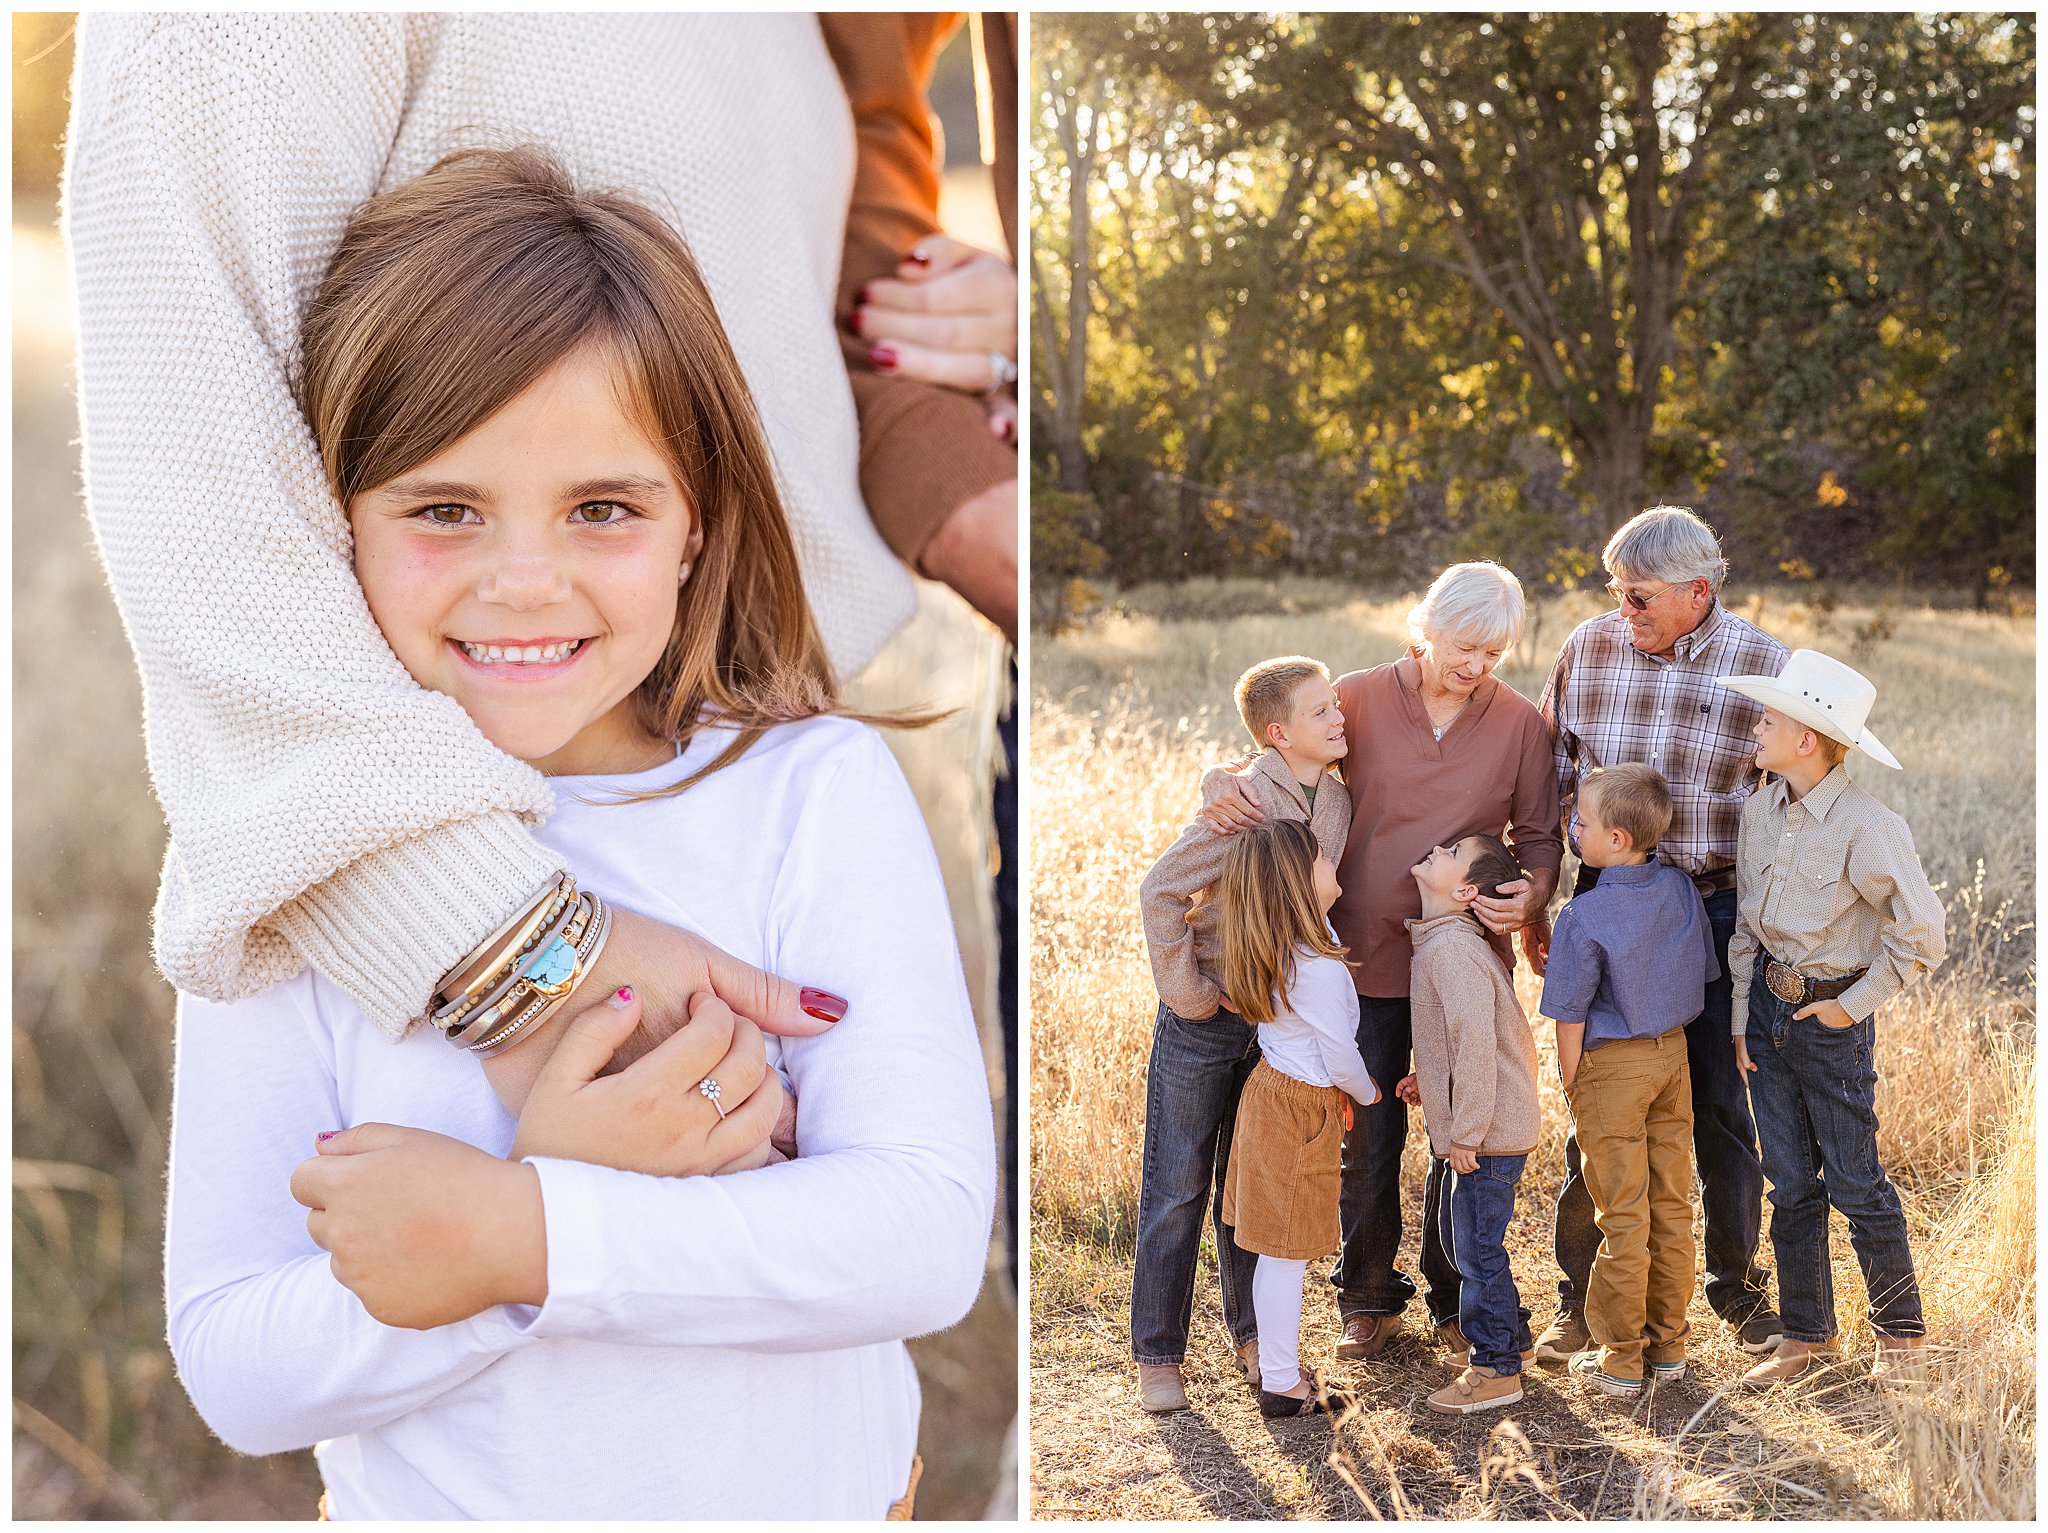 Grass Field Family Session Extended Family Chico CA Fall October Neutrals Brown,